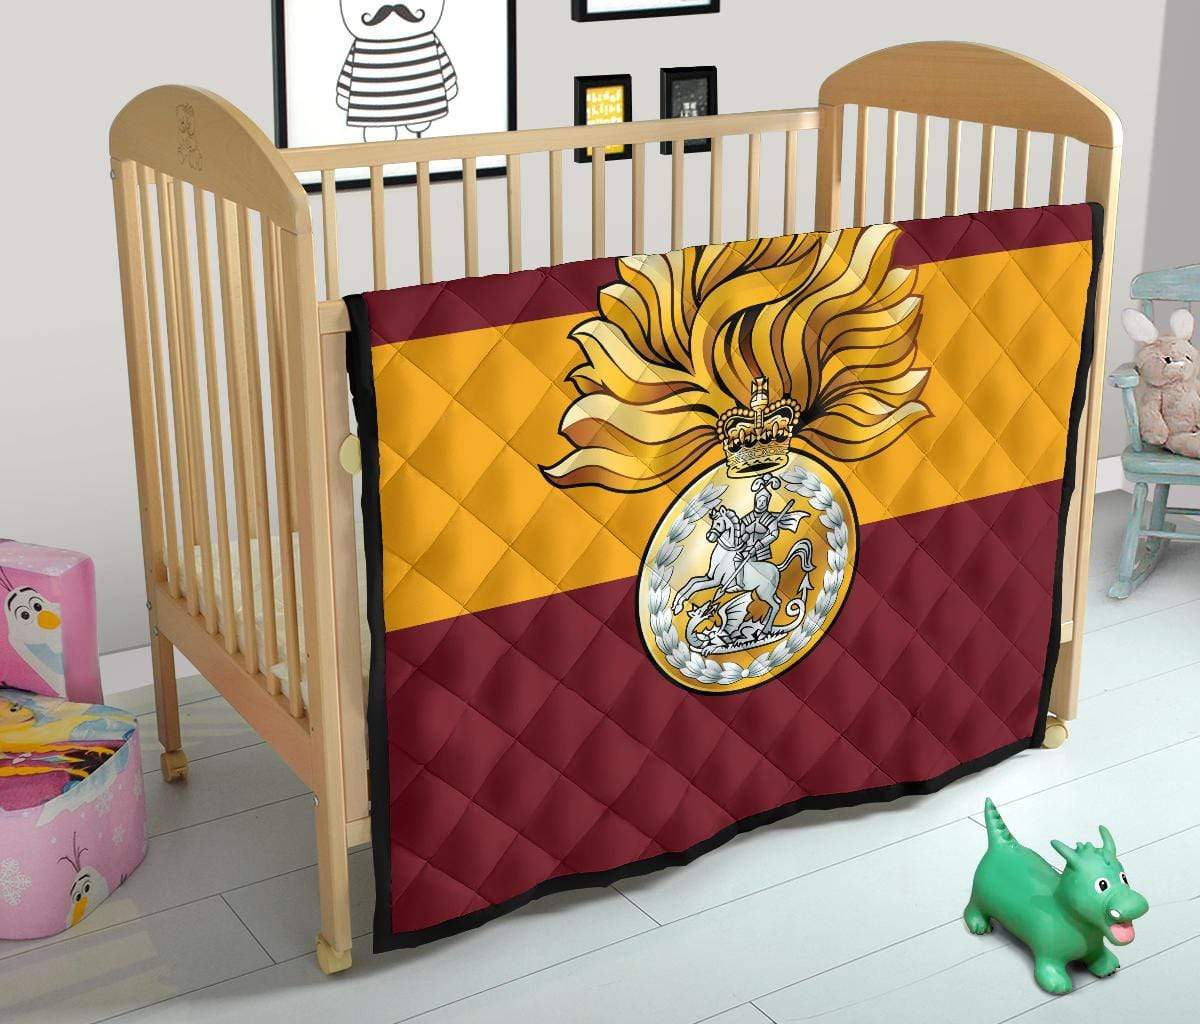 quilt Crib (45 x 50 inches / 114 x 127 cm) Royal Regiment of Fusiliers Quilted Blanket